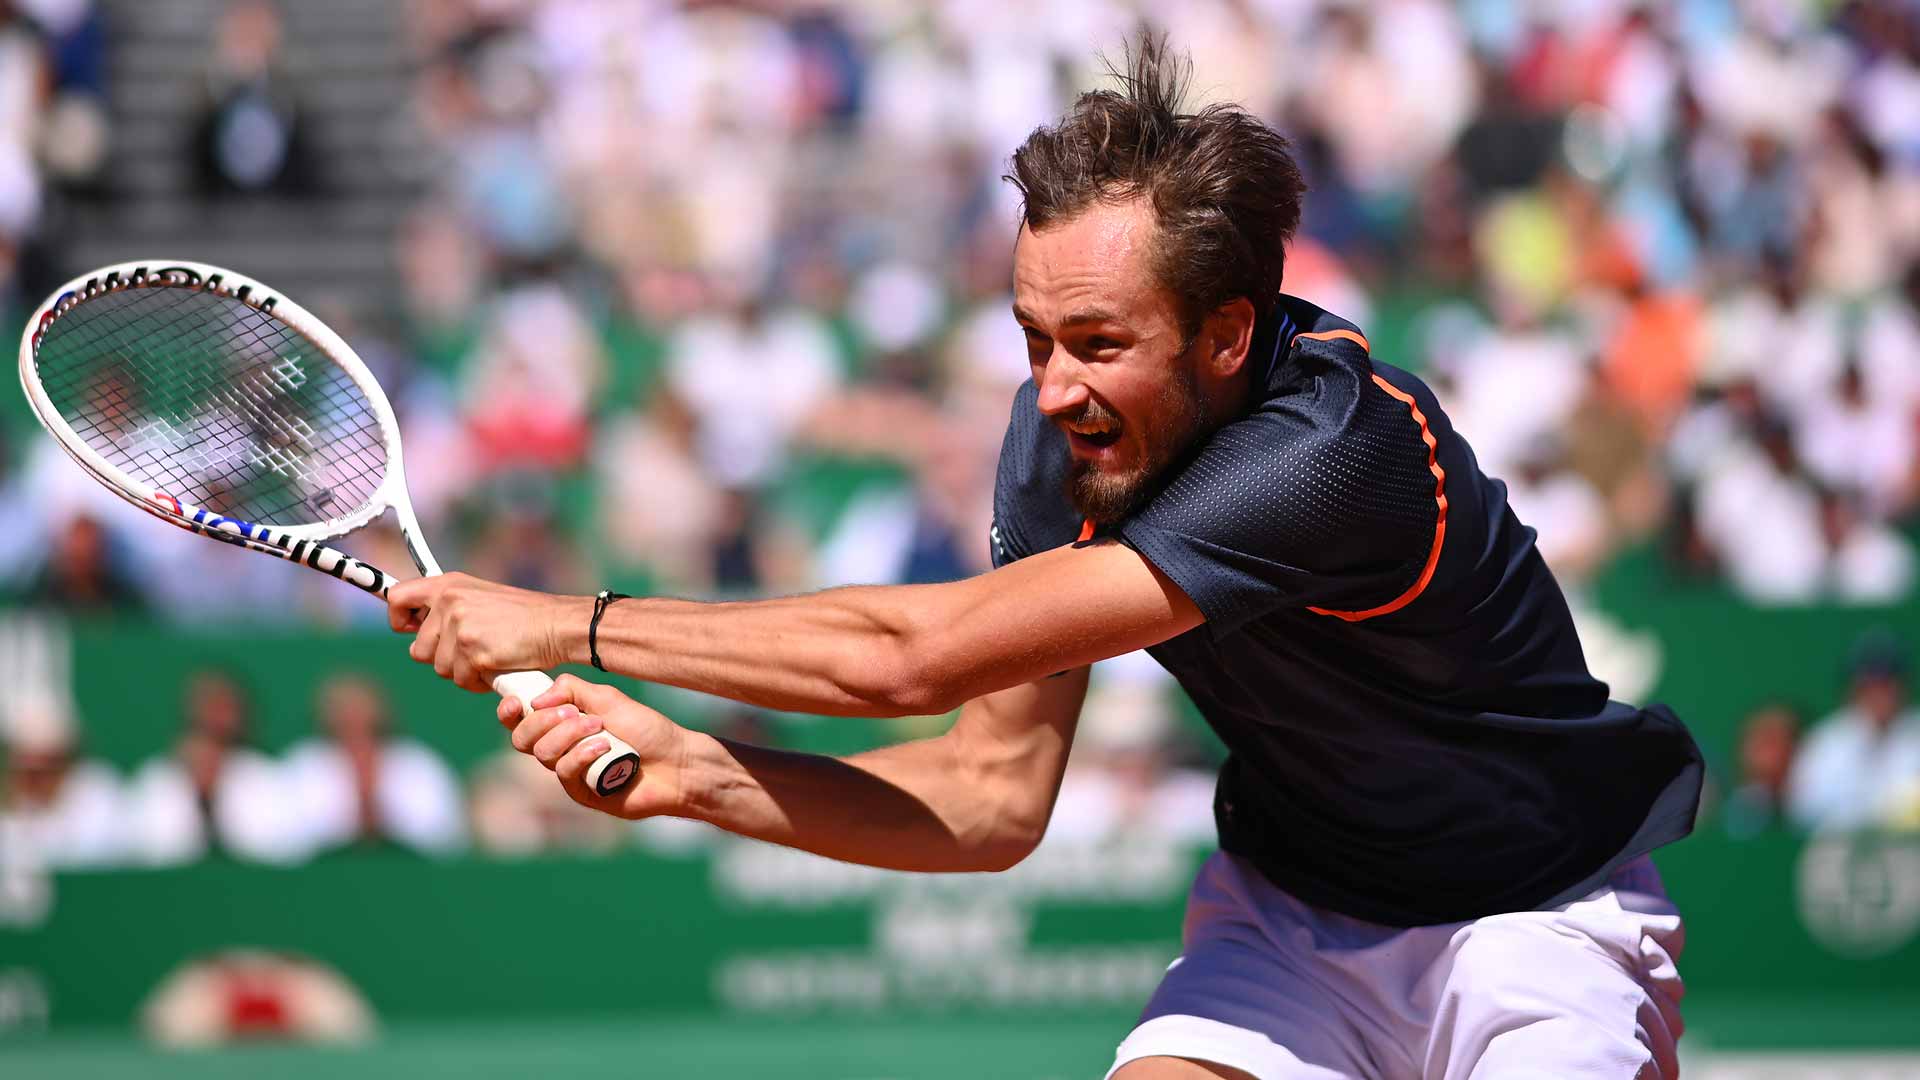 Daniil Medvedev in action against Holger Rune on Friday at the Rolex Monte-Carlo Masters.